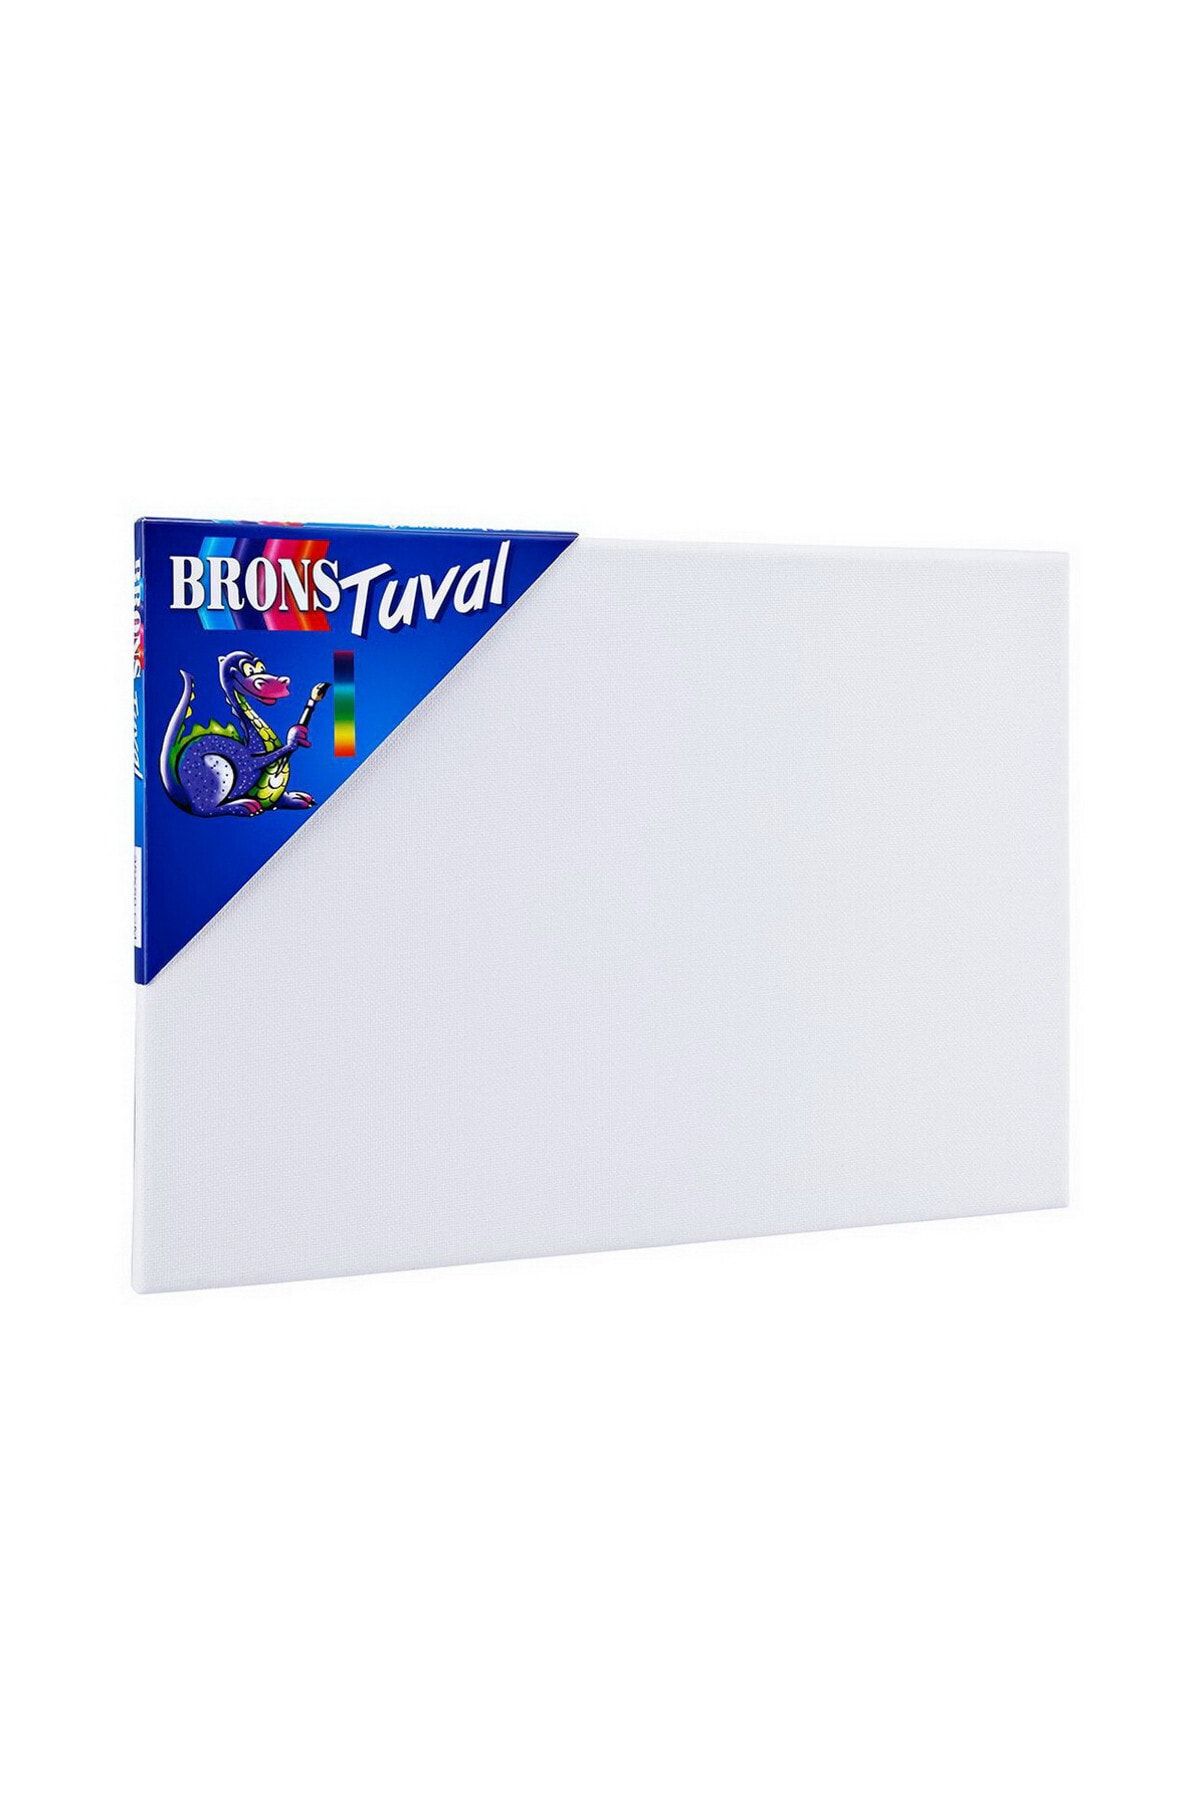 Brons Br-335 25 X 35 Tuval